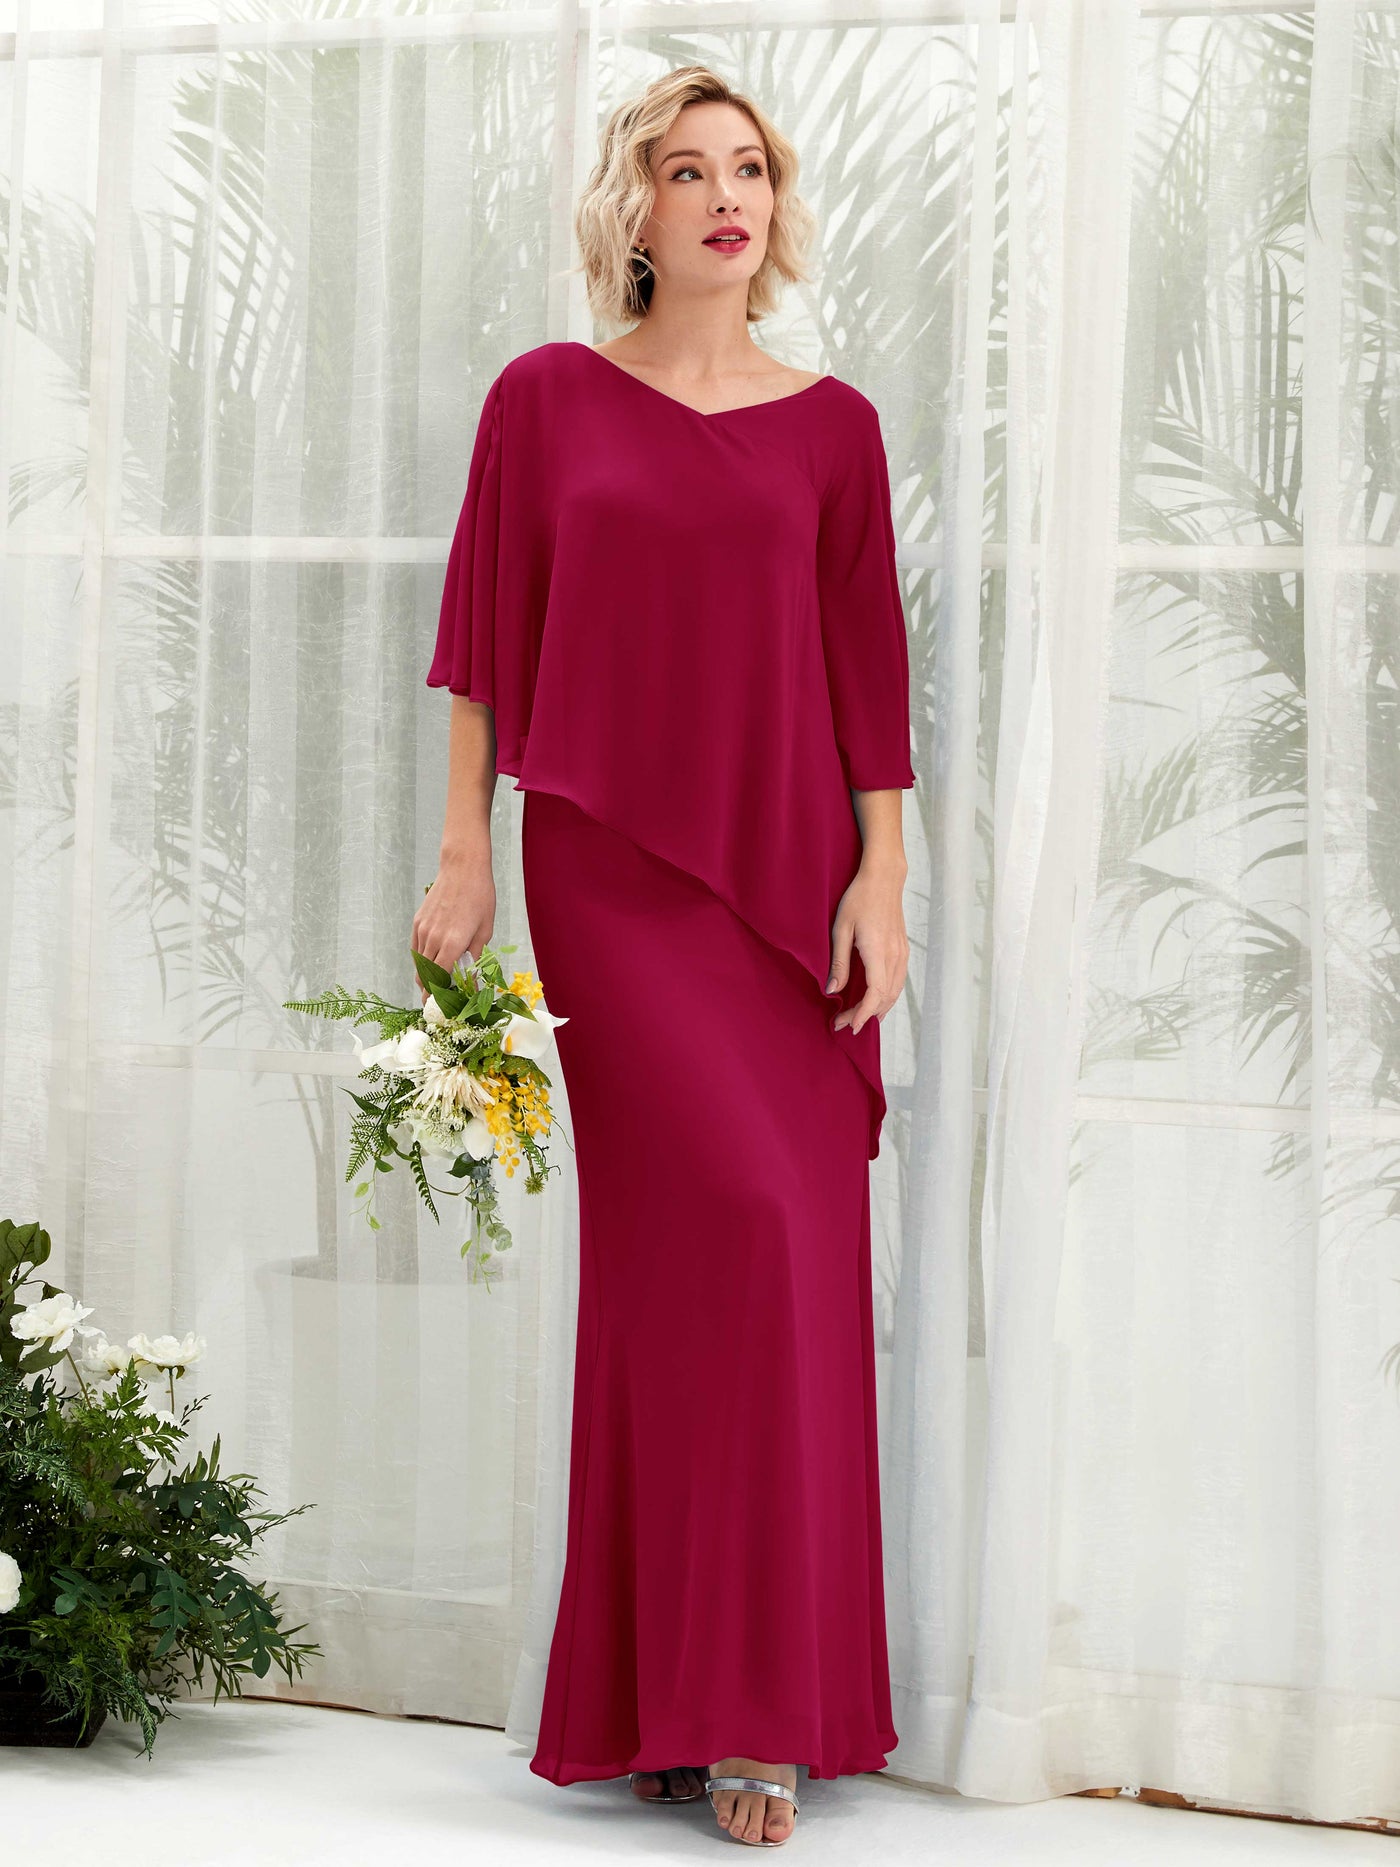 Jester Red Bridesmaid Dresses Bridesmaid Dress Bohemian Chiffon V-neck Full Length 3/4 Sleeves Wedding Party Dress (81222541)#color_jester-red